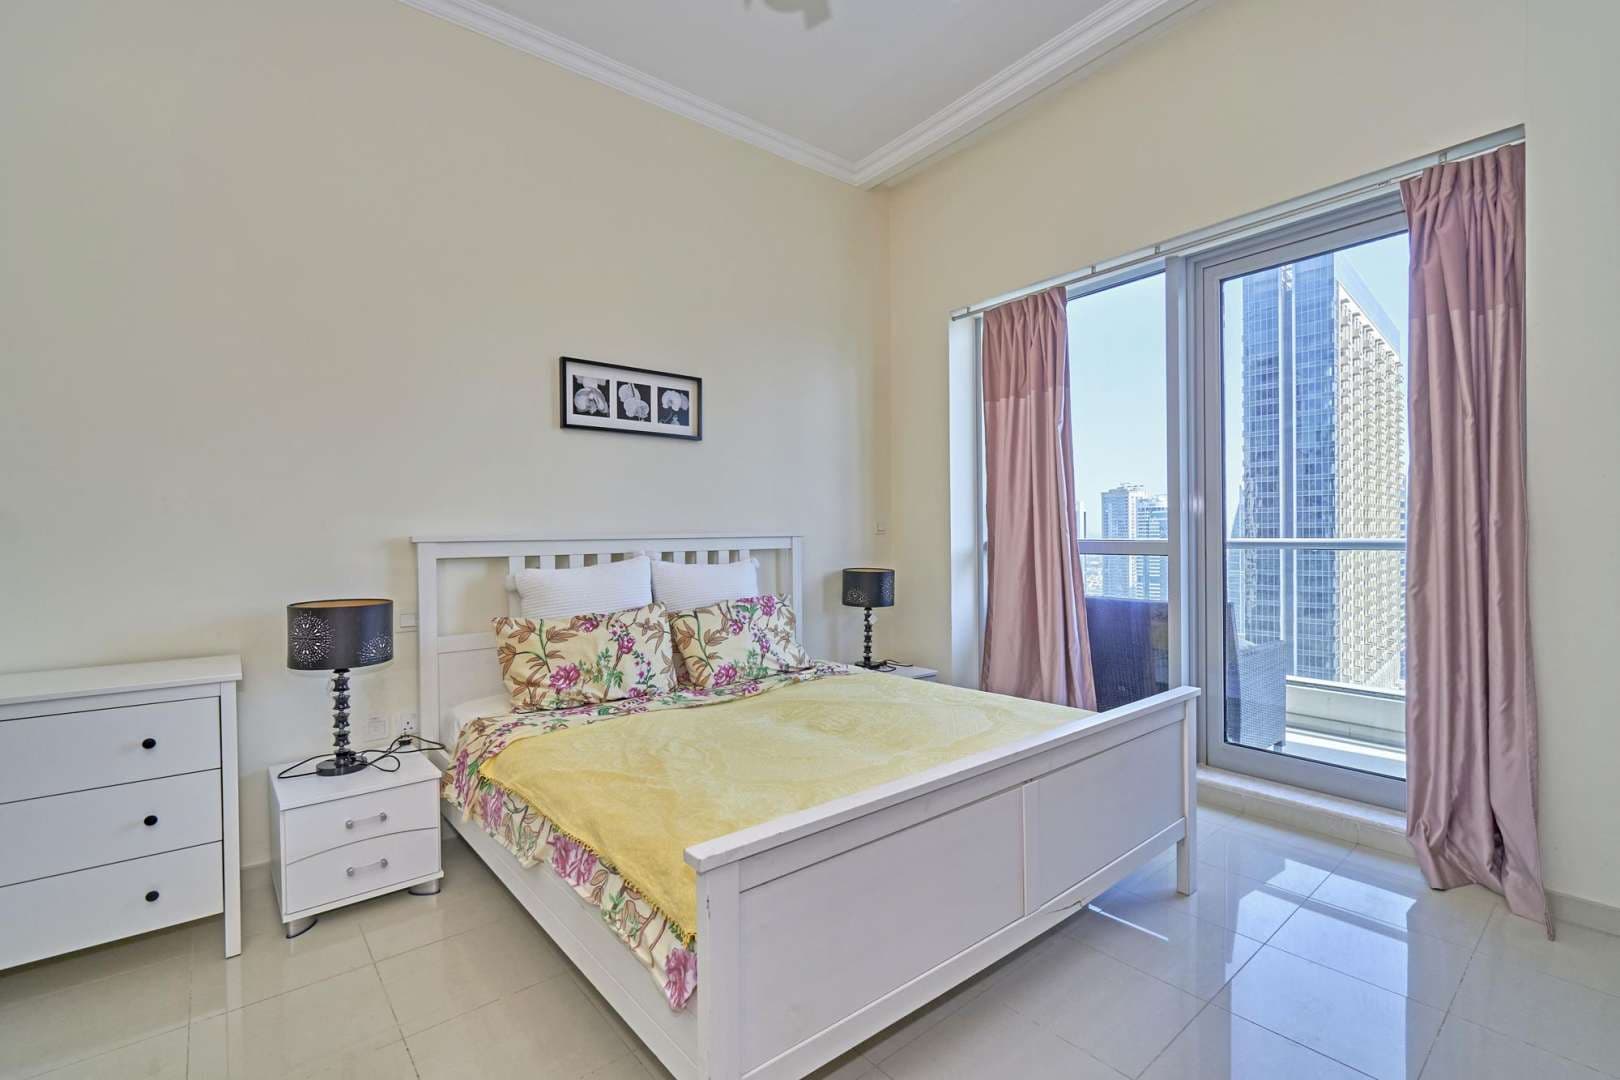 1 Bedroom Apartment For Rent Bay Central Tower Lp05723 2092254b1b68ee00.jpg